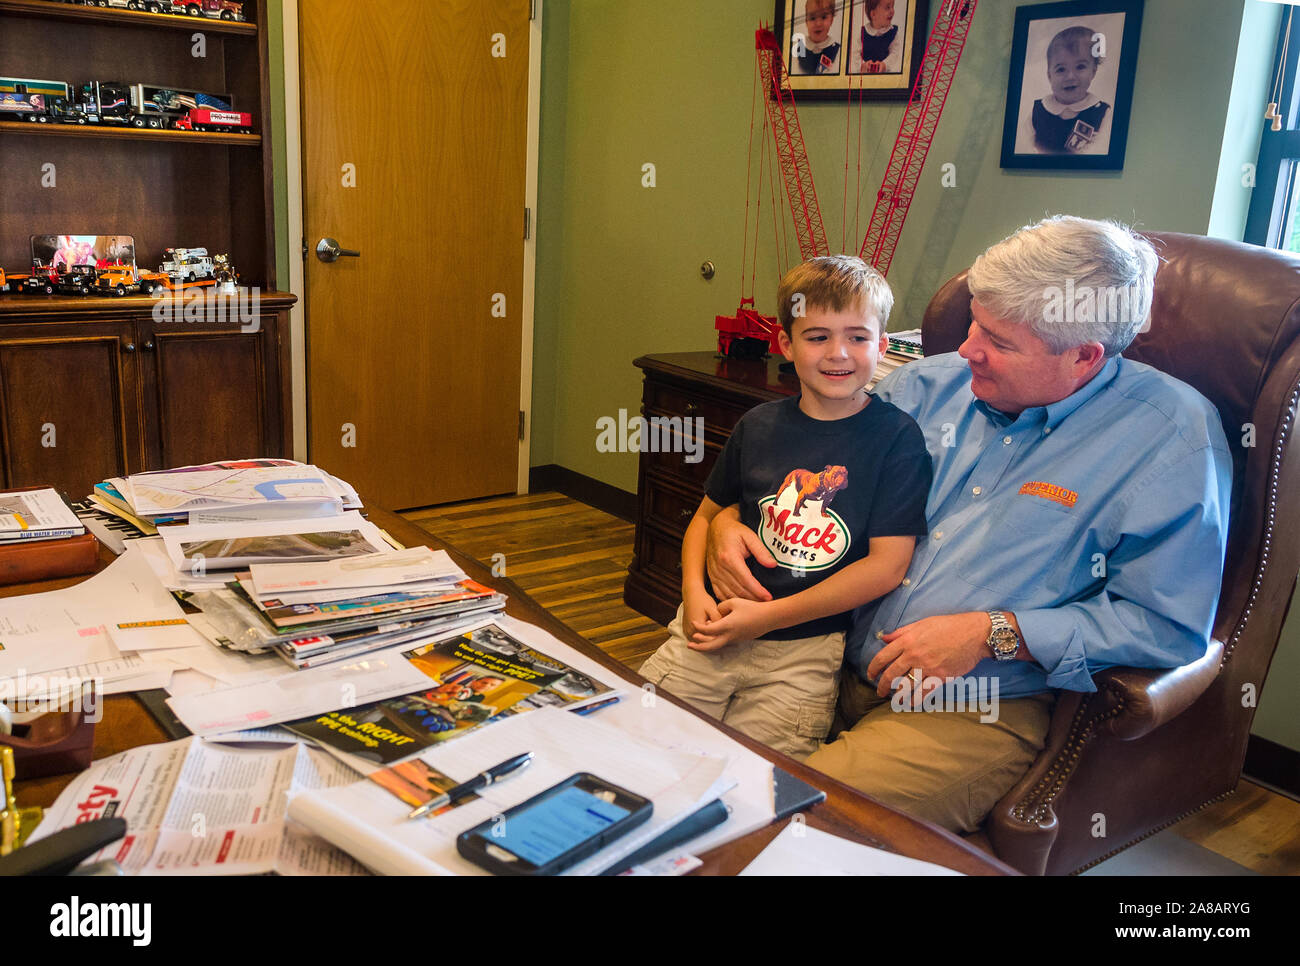 A boy greets his father as he drops by Superior Transportation to visit and “work with dad,” Sept. 30, 2015, in North Charleston, South Carolina. Stock Photo